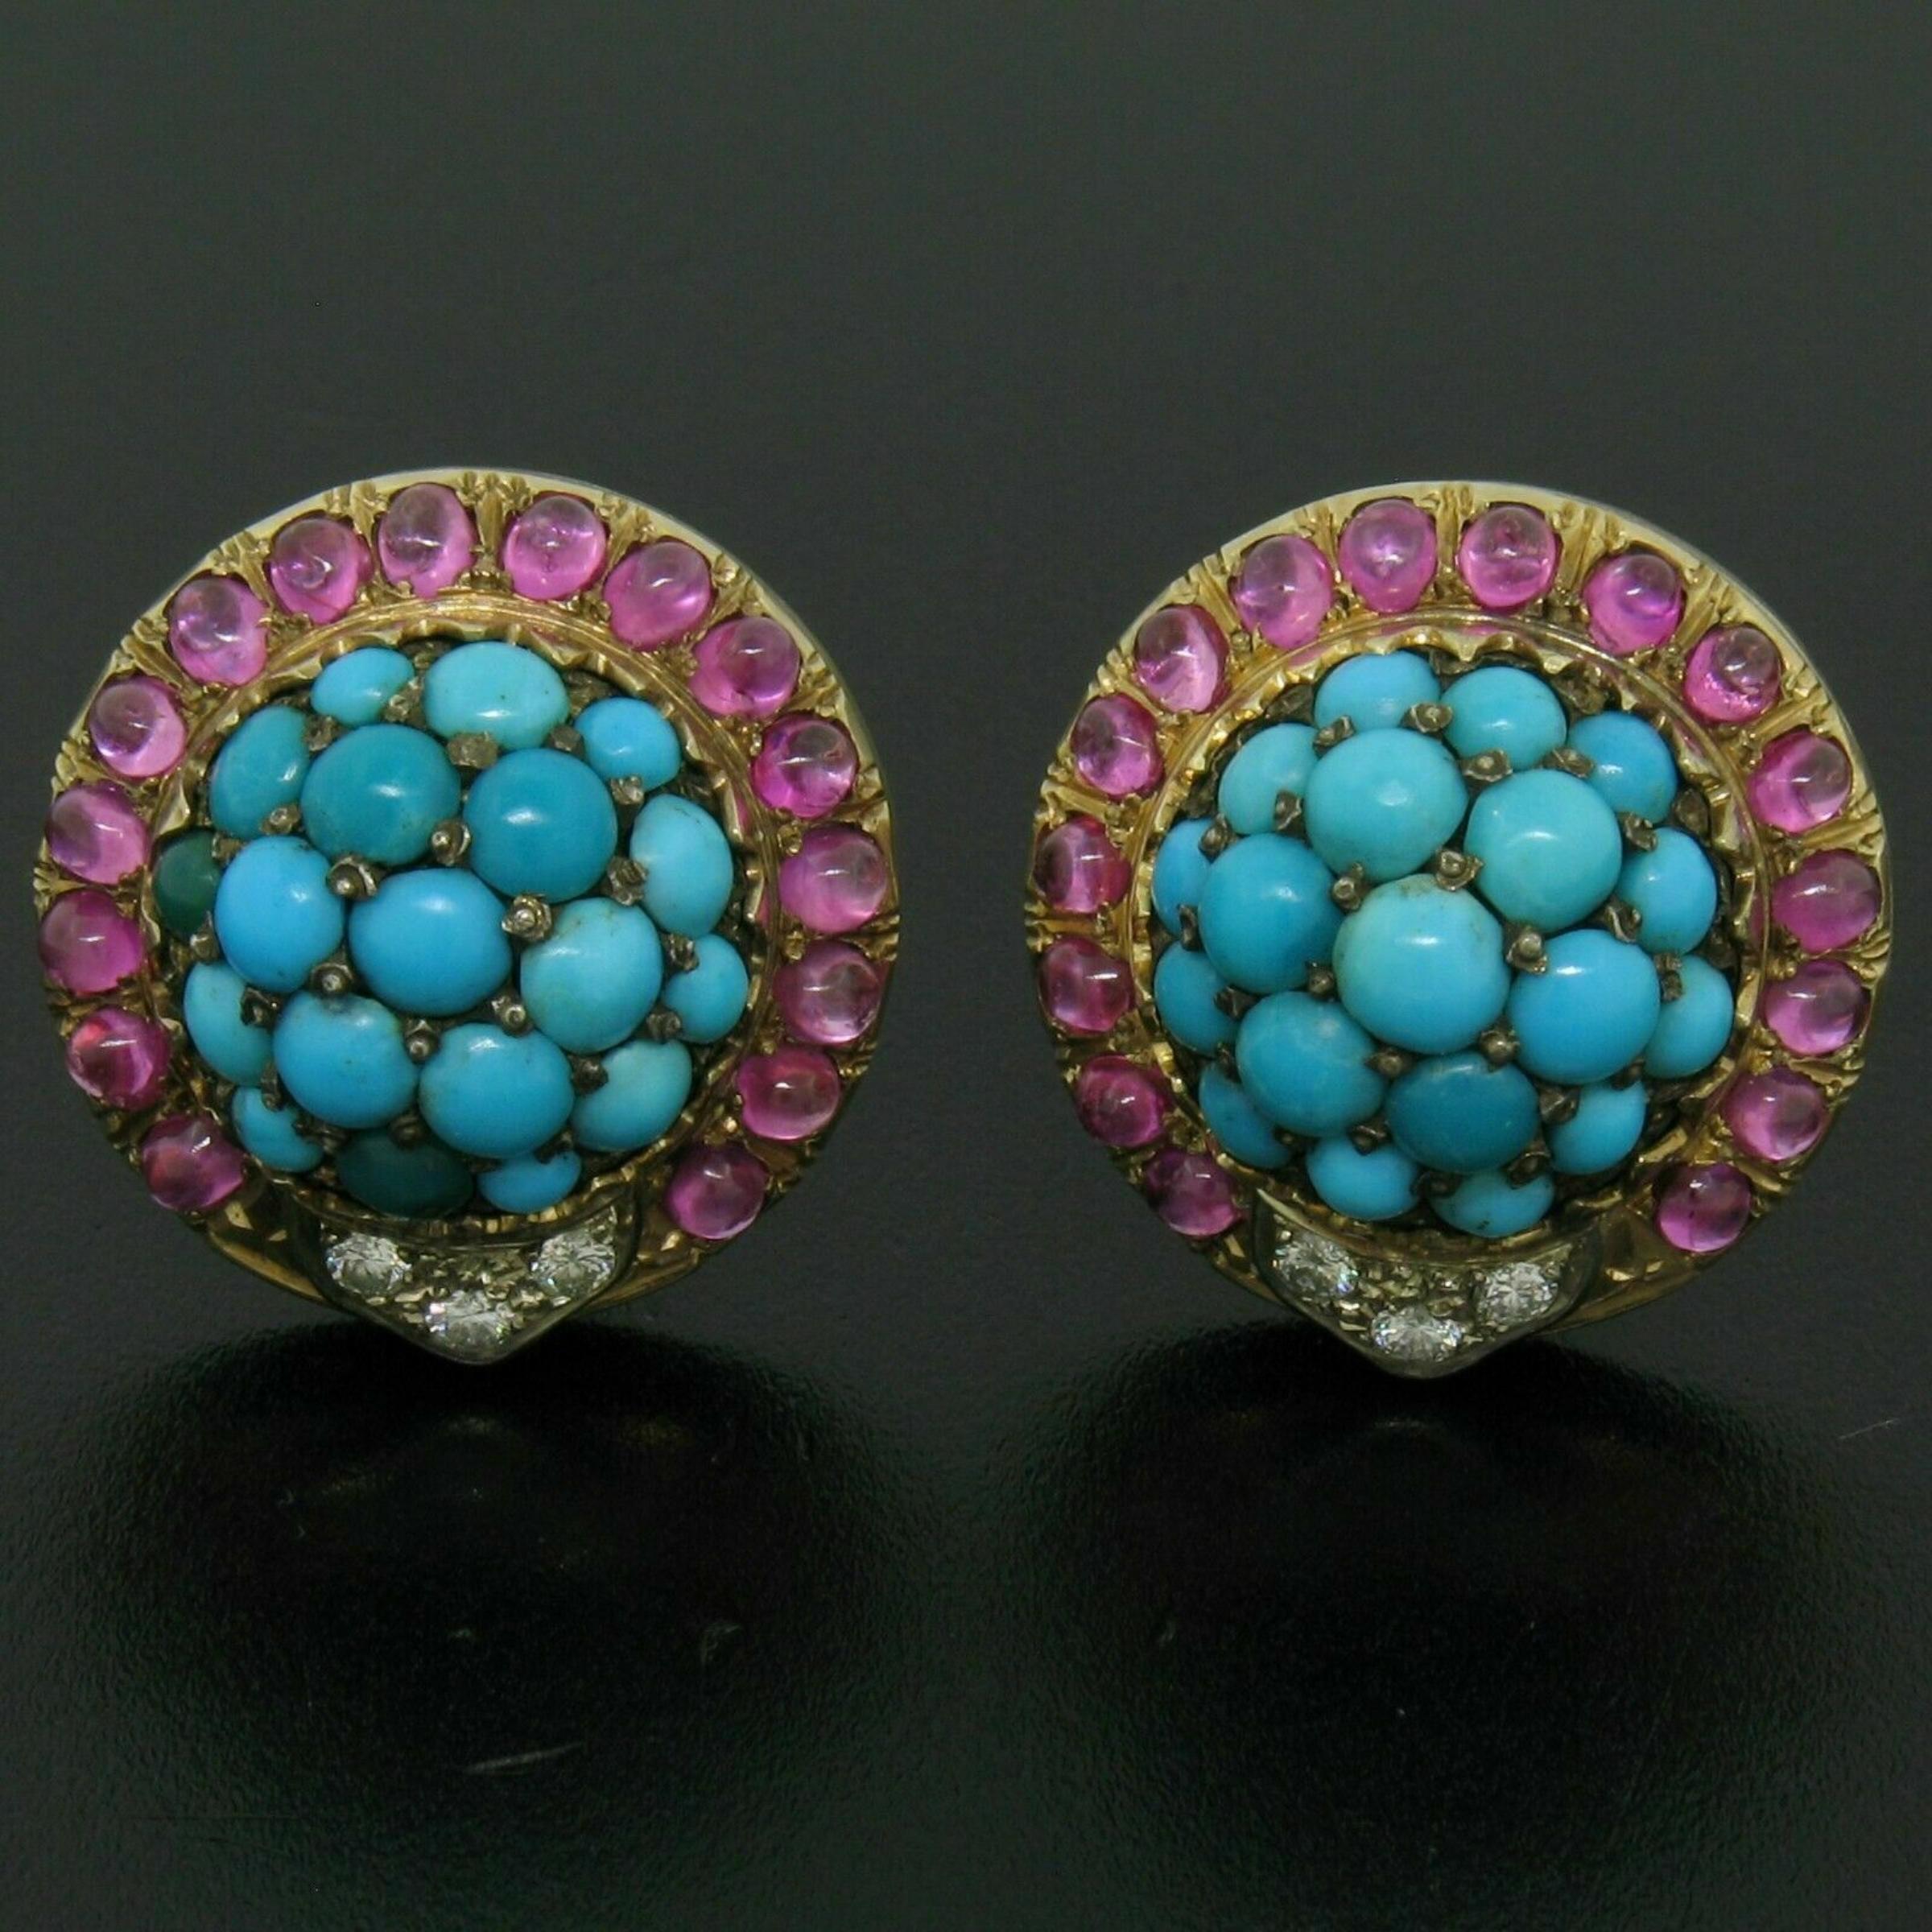 Retro Vintage 14K Yellow Gold 3.56ctw Turquoise Diamond & Ruby Cluster Button Earrings